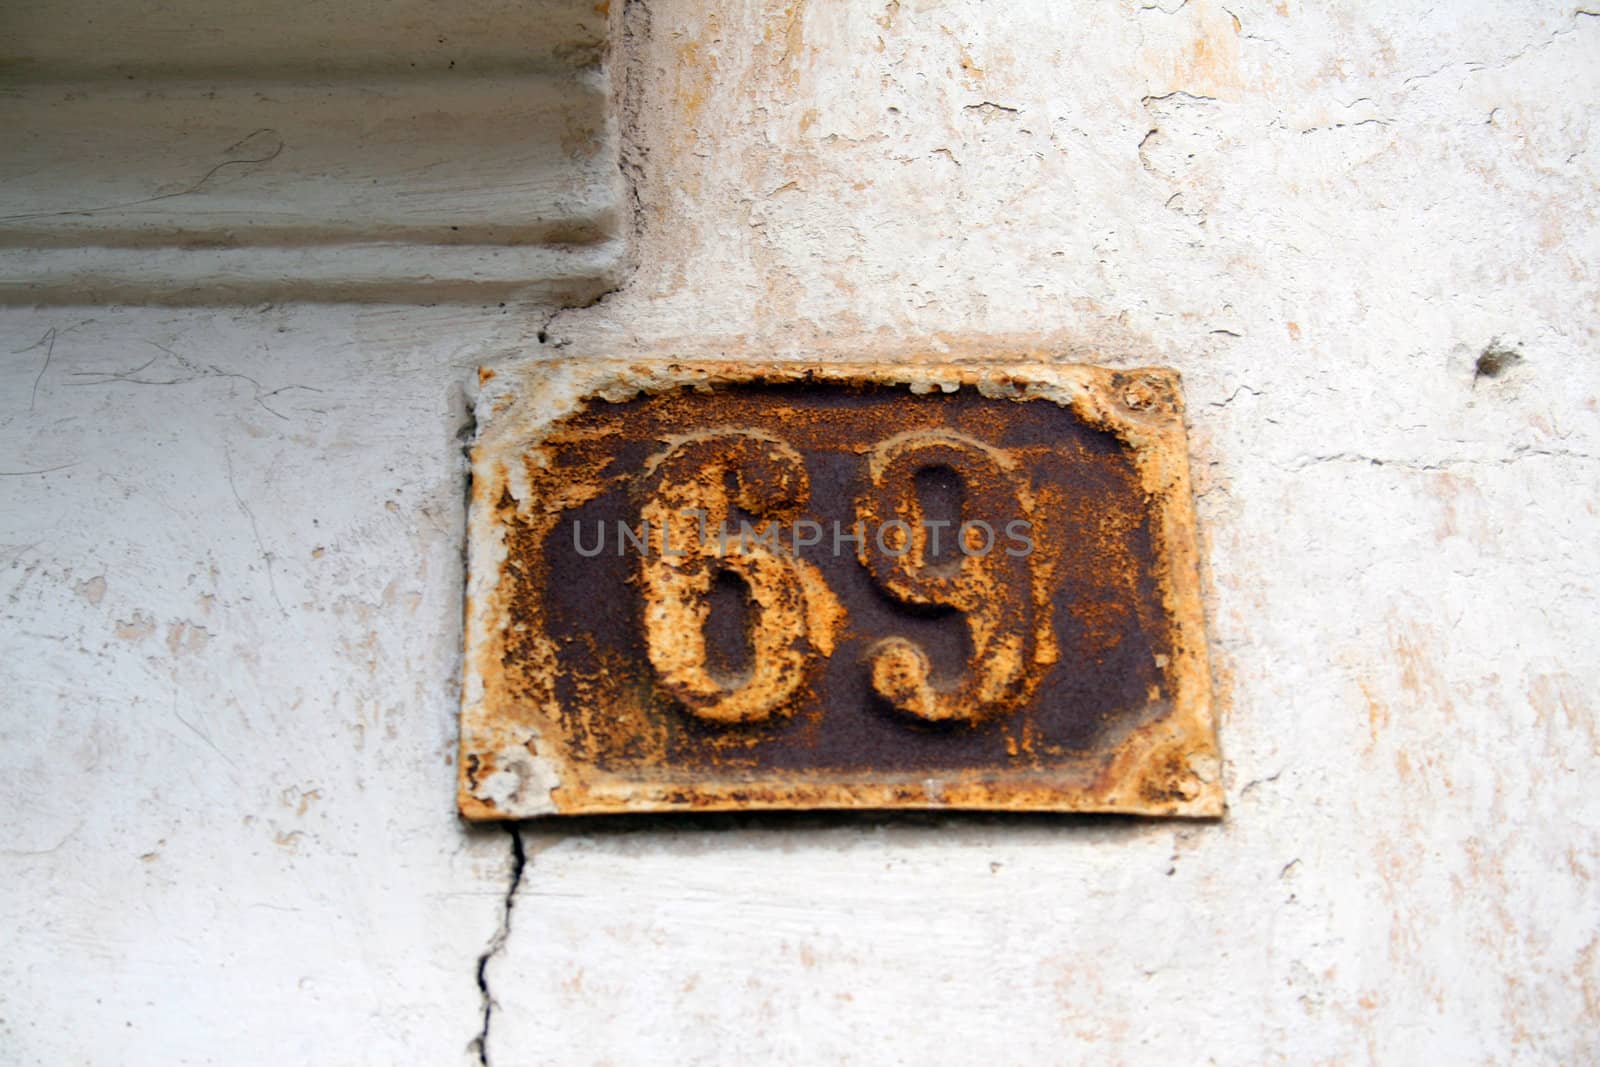 House address plate number